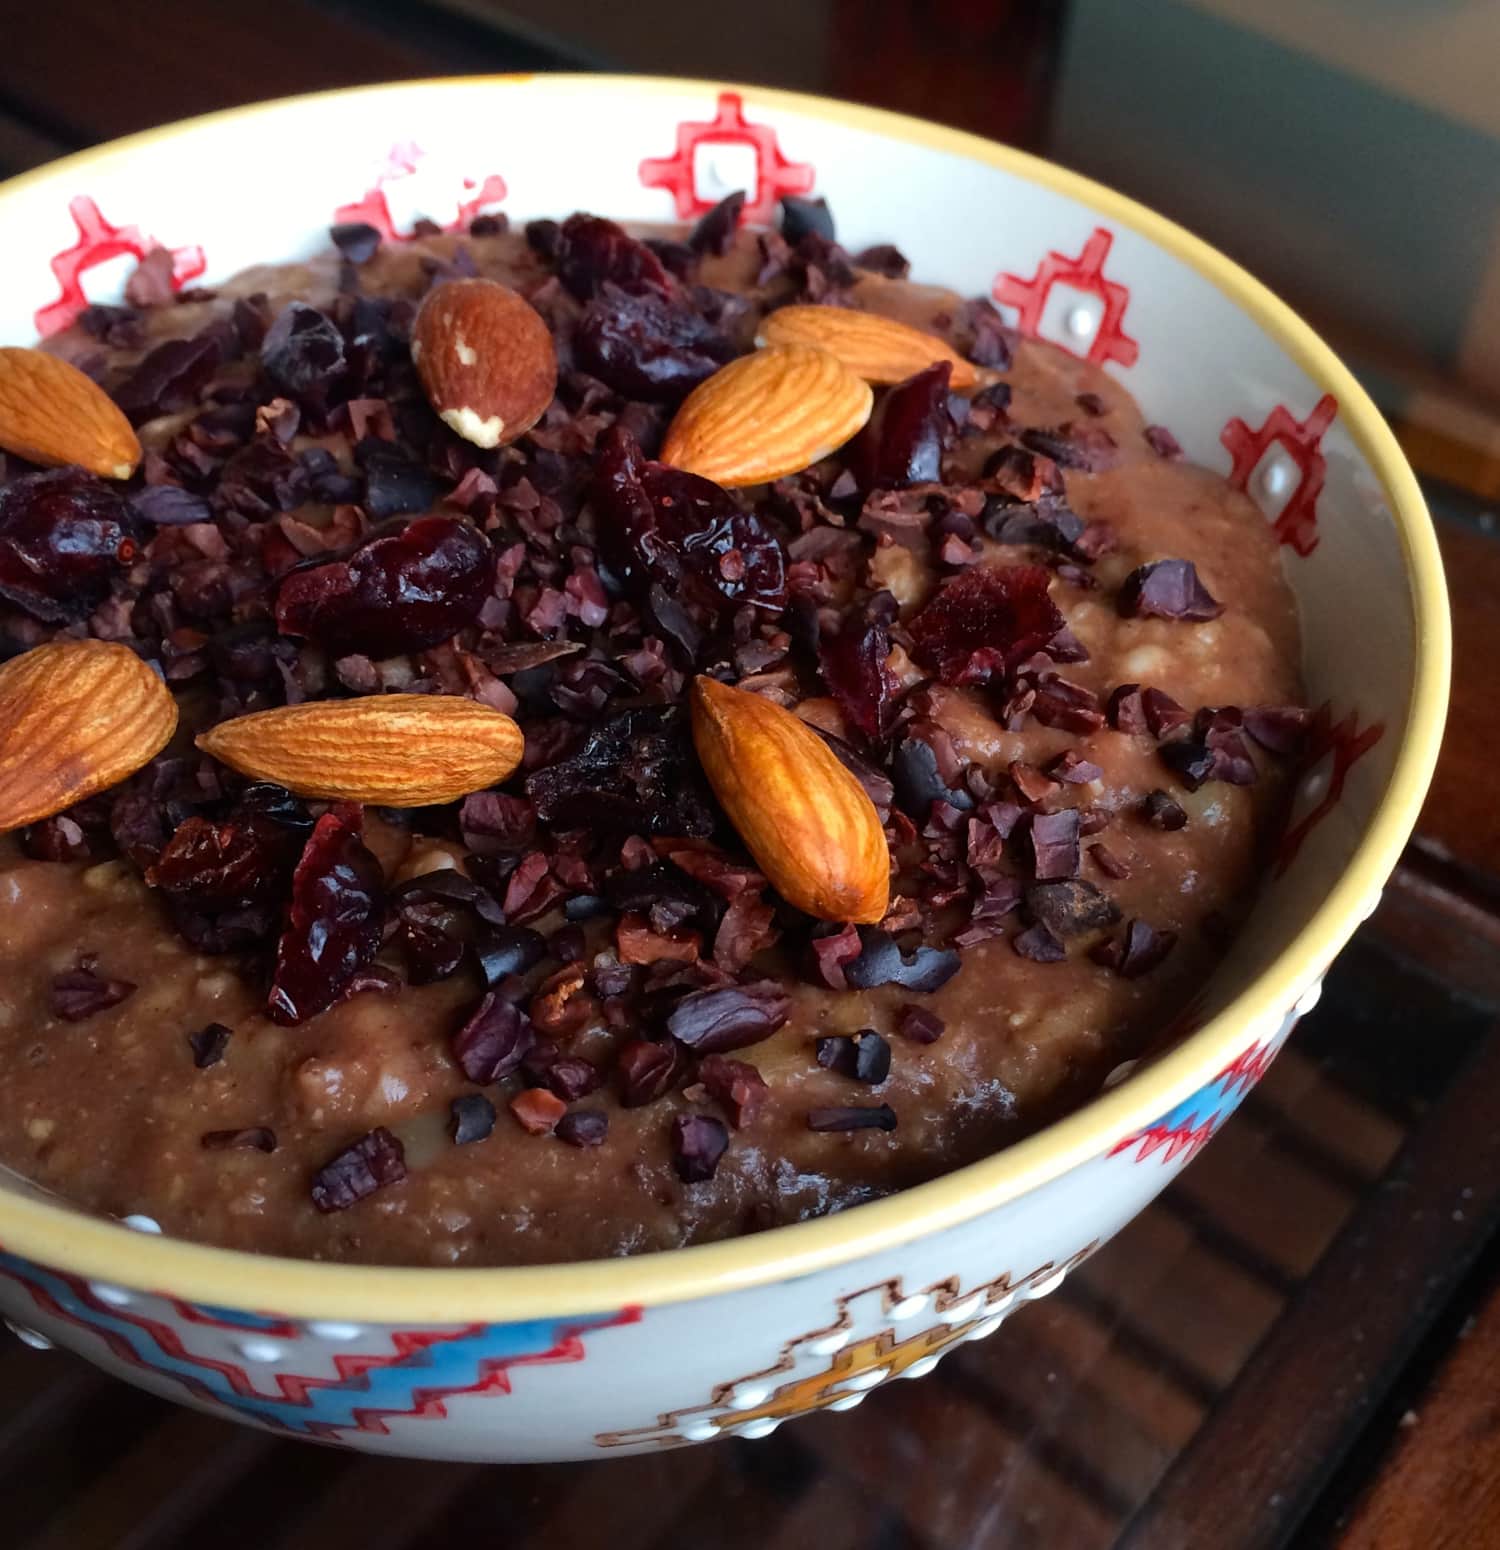 Chocolate Oatmeal topped with Cacao Nibs, Craisins and Almonds